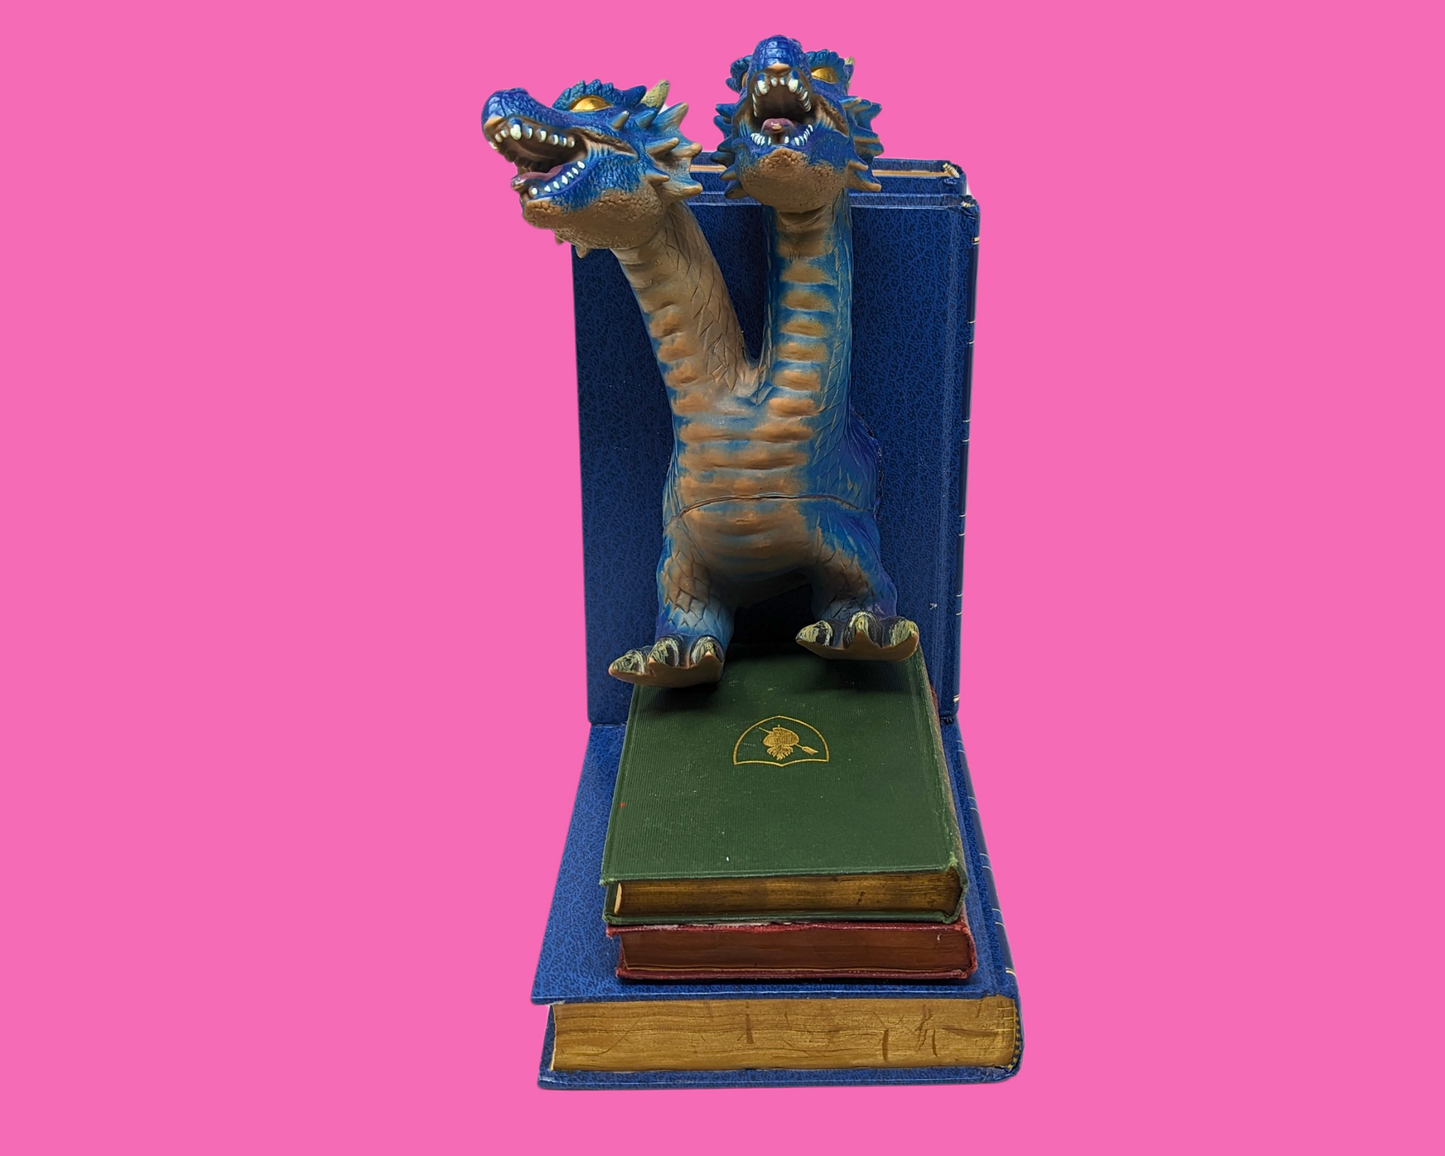 Handmade and Upcycled Two Headed Dragon Bookends